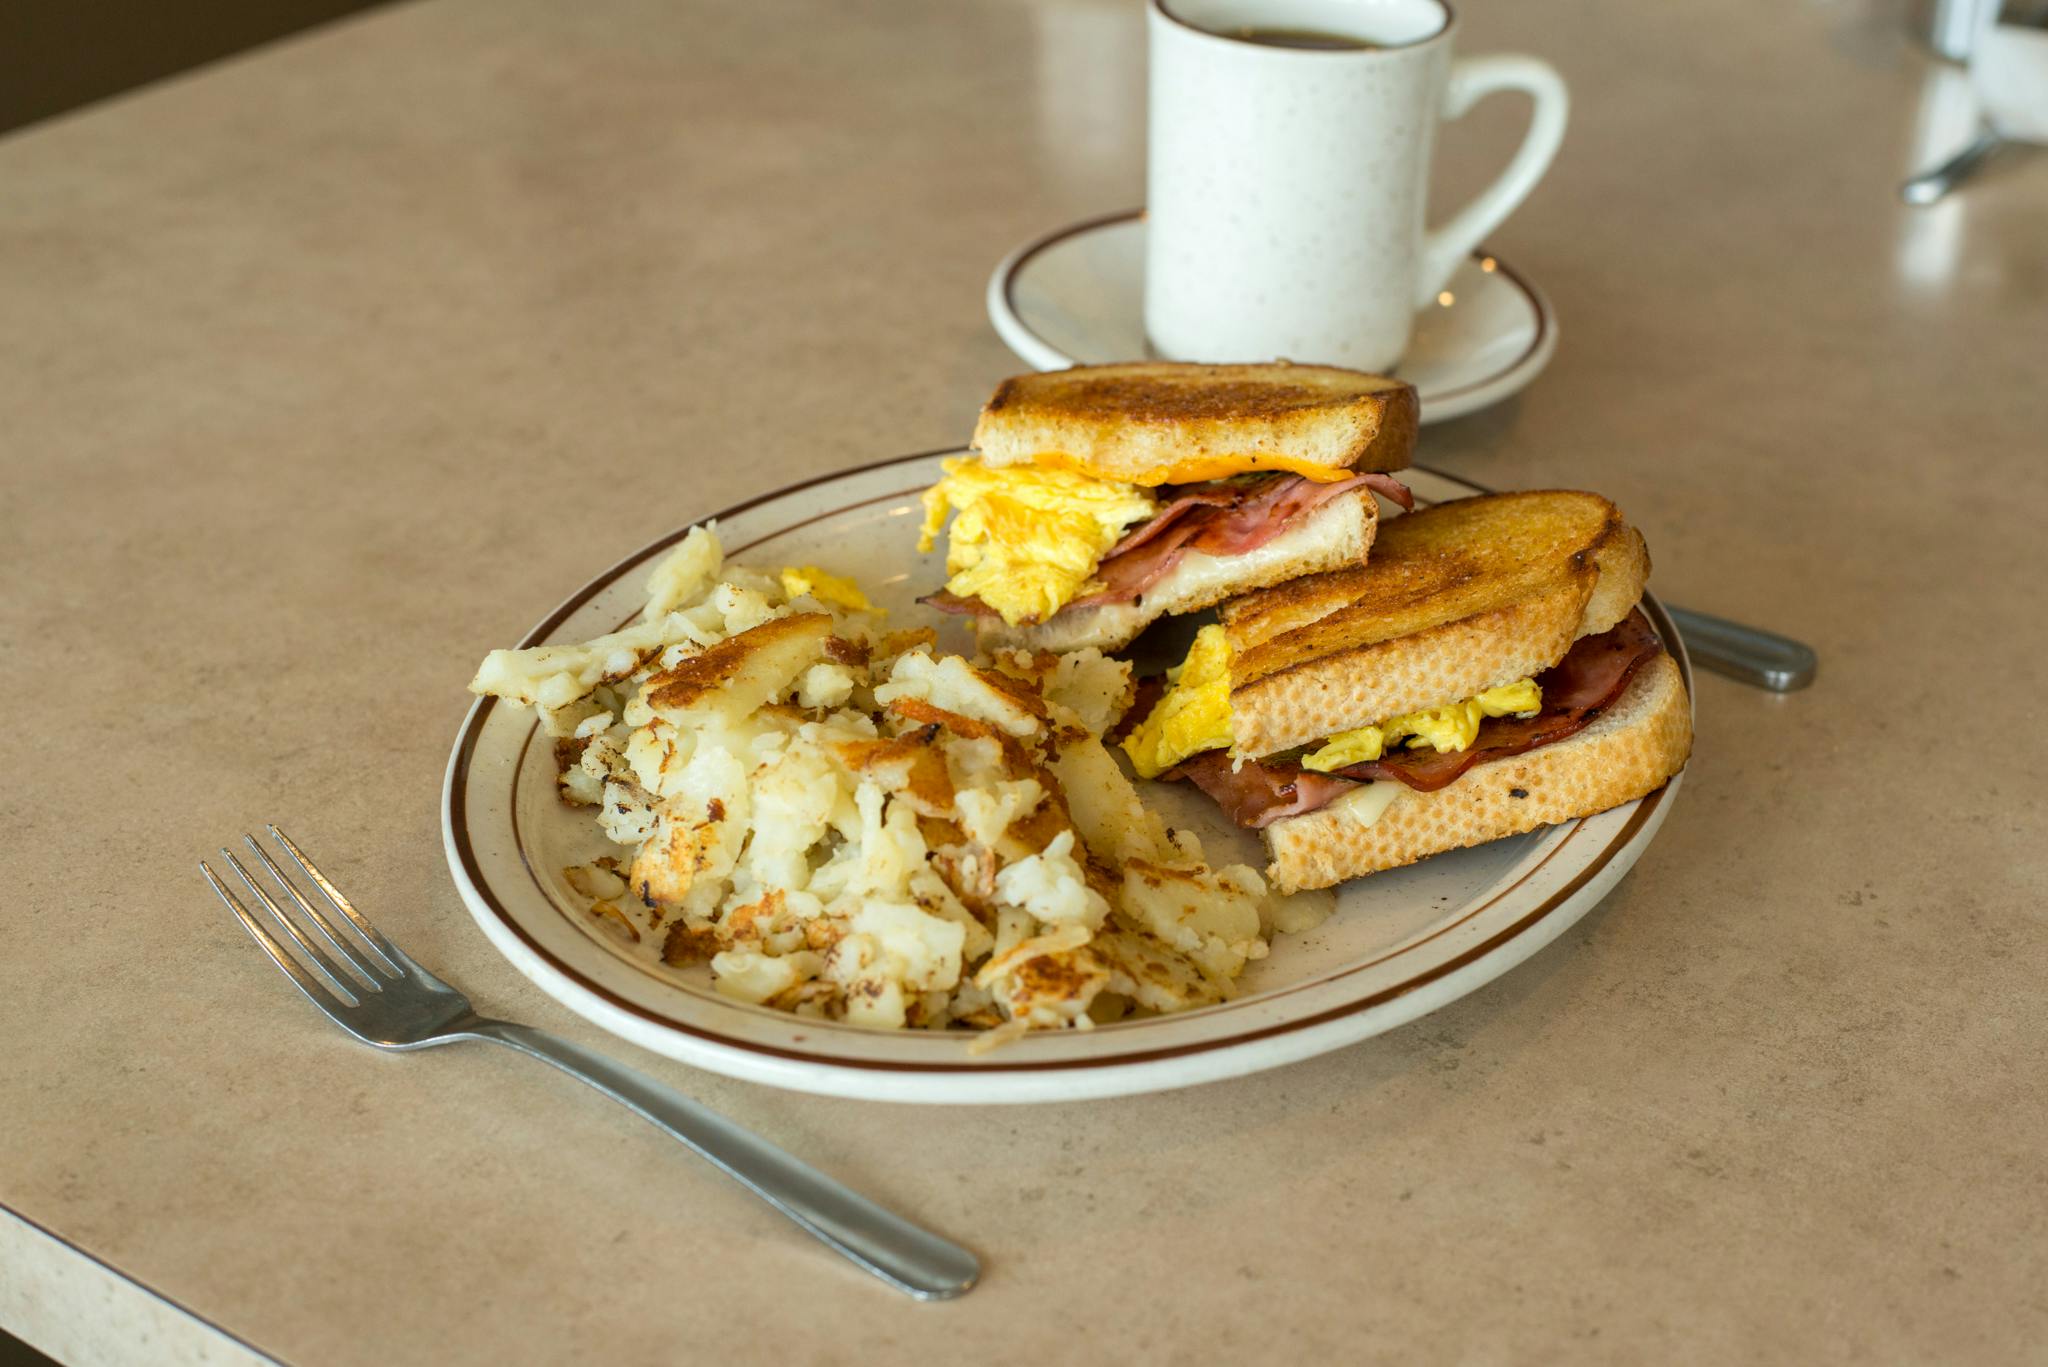 Ham, Egg and Cheese Melt Breakfast from The Pancake Place in Green Bay, WI